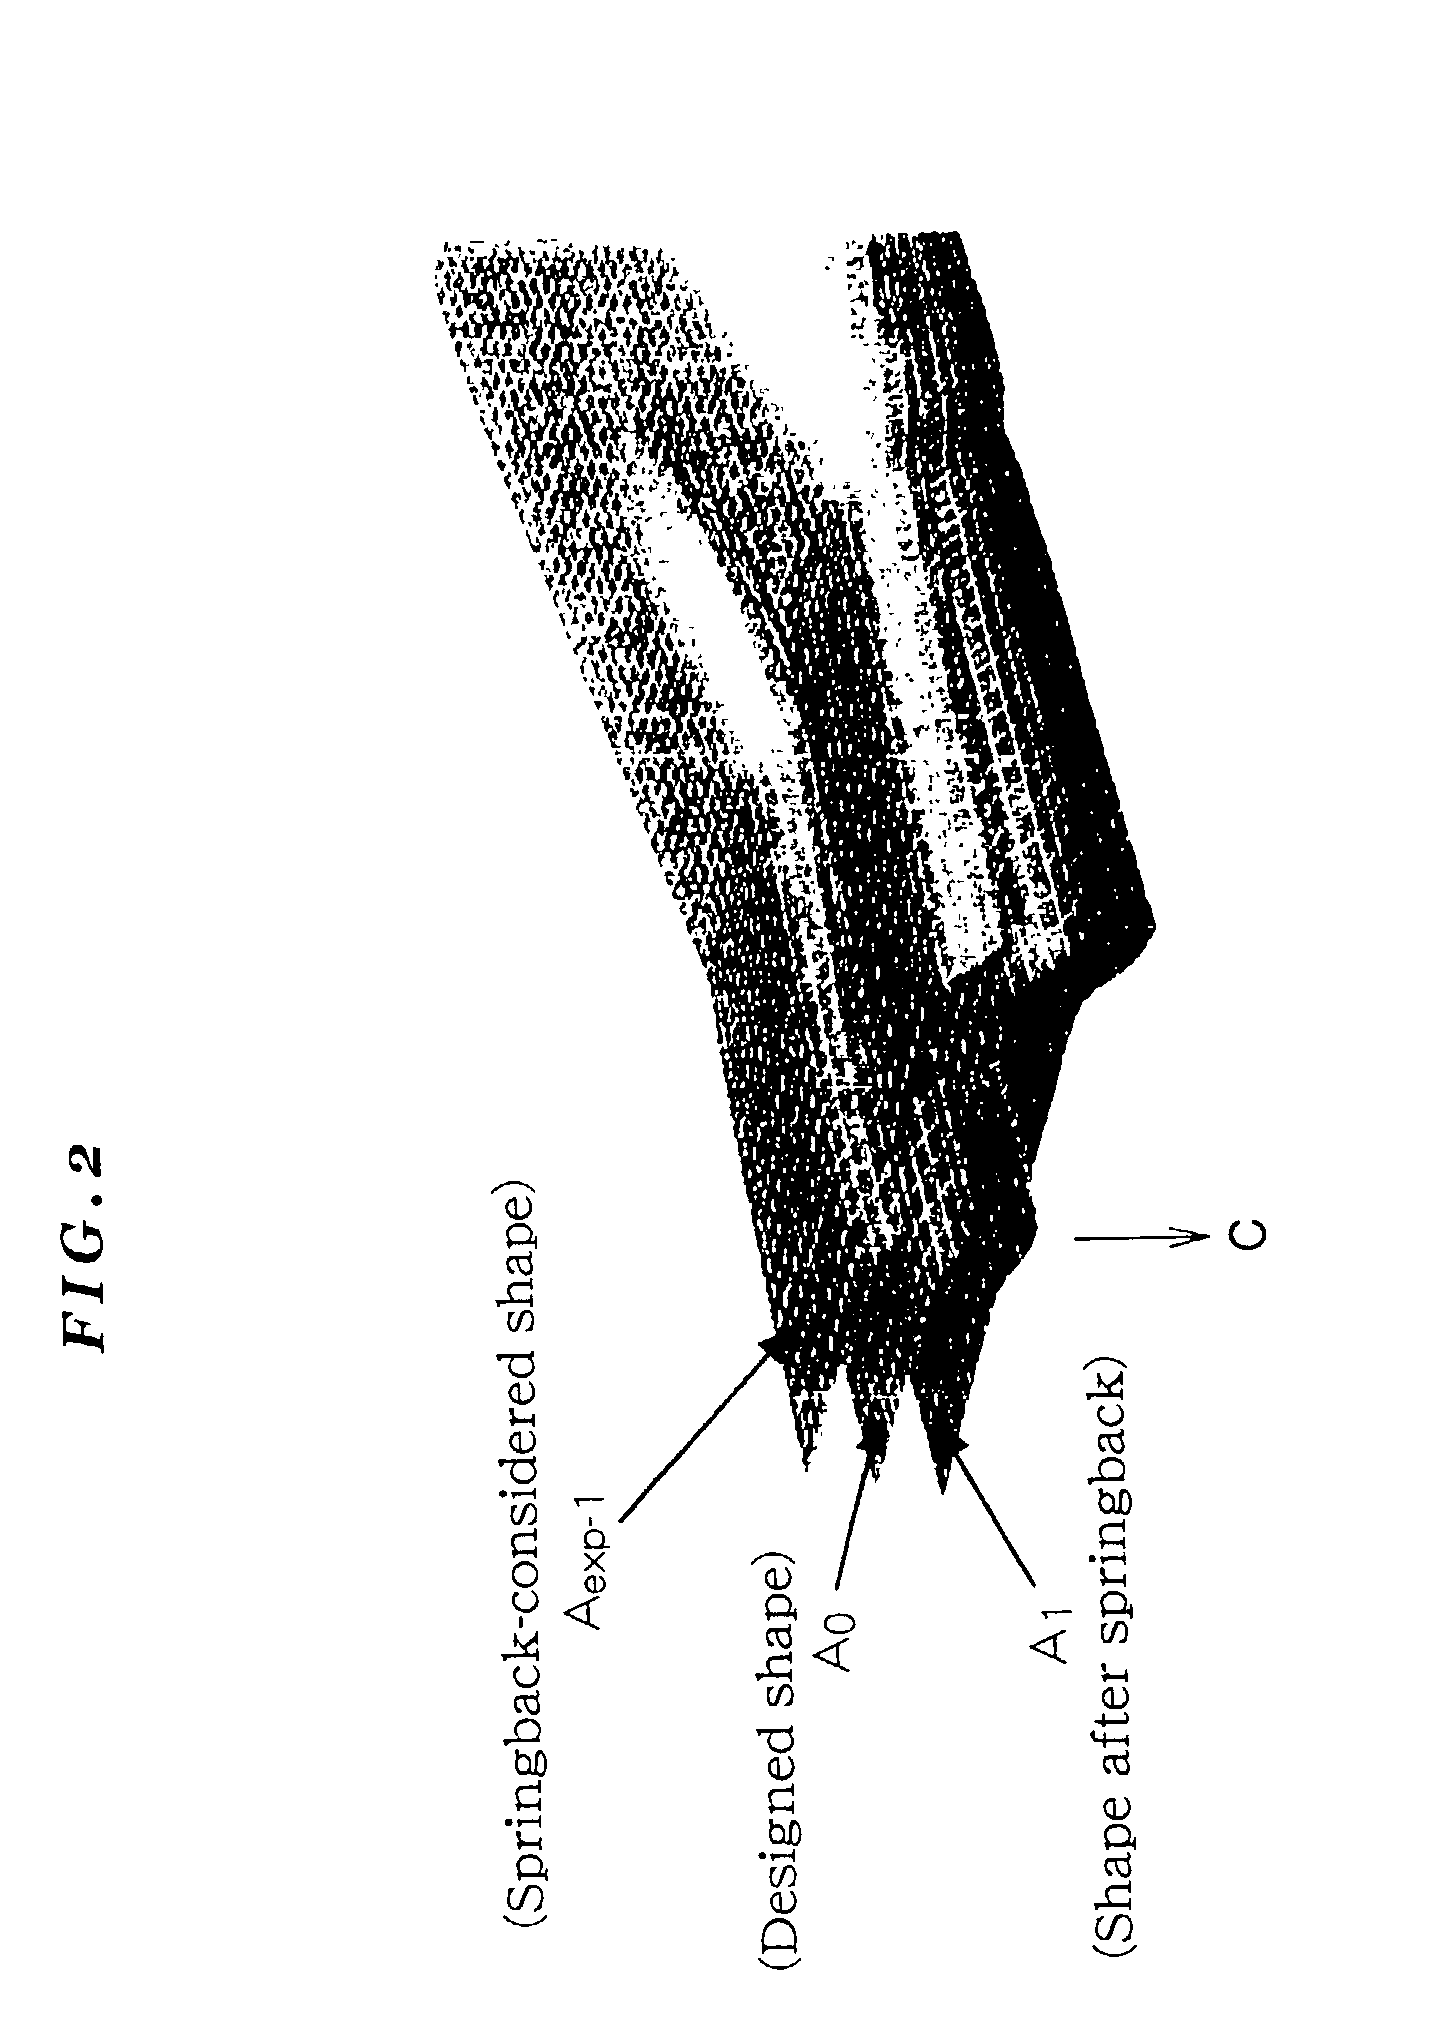 System, method, and computer program product for aiding optimization of die assembly shape for plasticity manufacturing